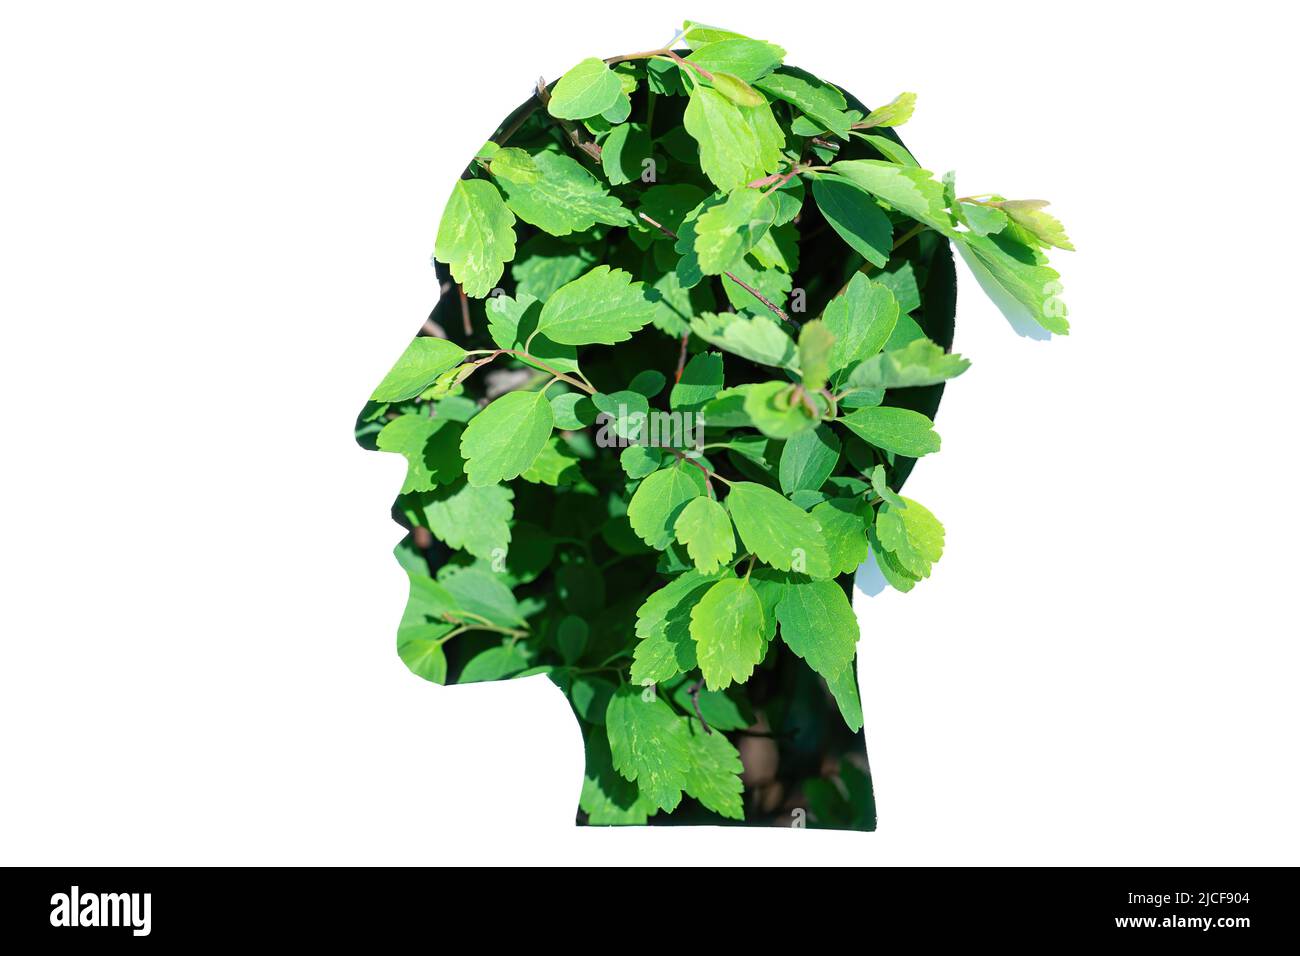 Green fresh leaves coming through a man's head profile paper cut-out with copy space. Creative sustainable living concept. Stock Photo